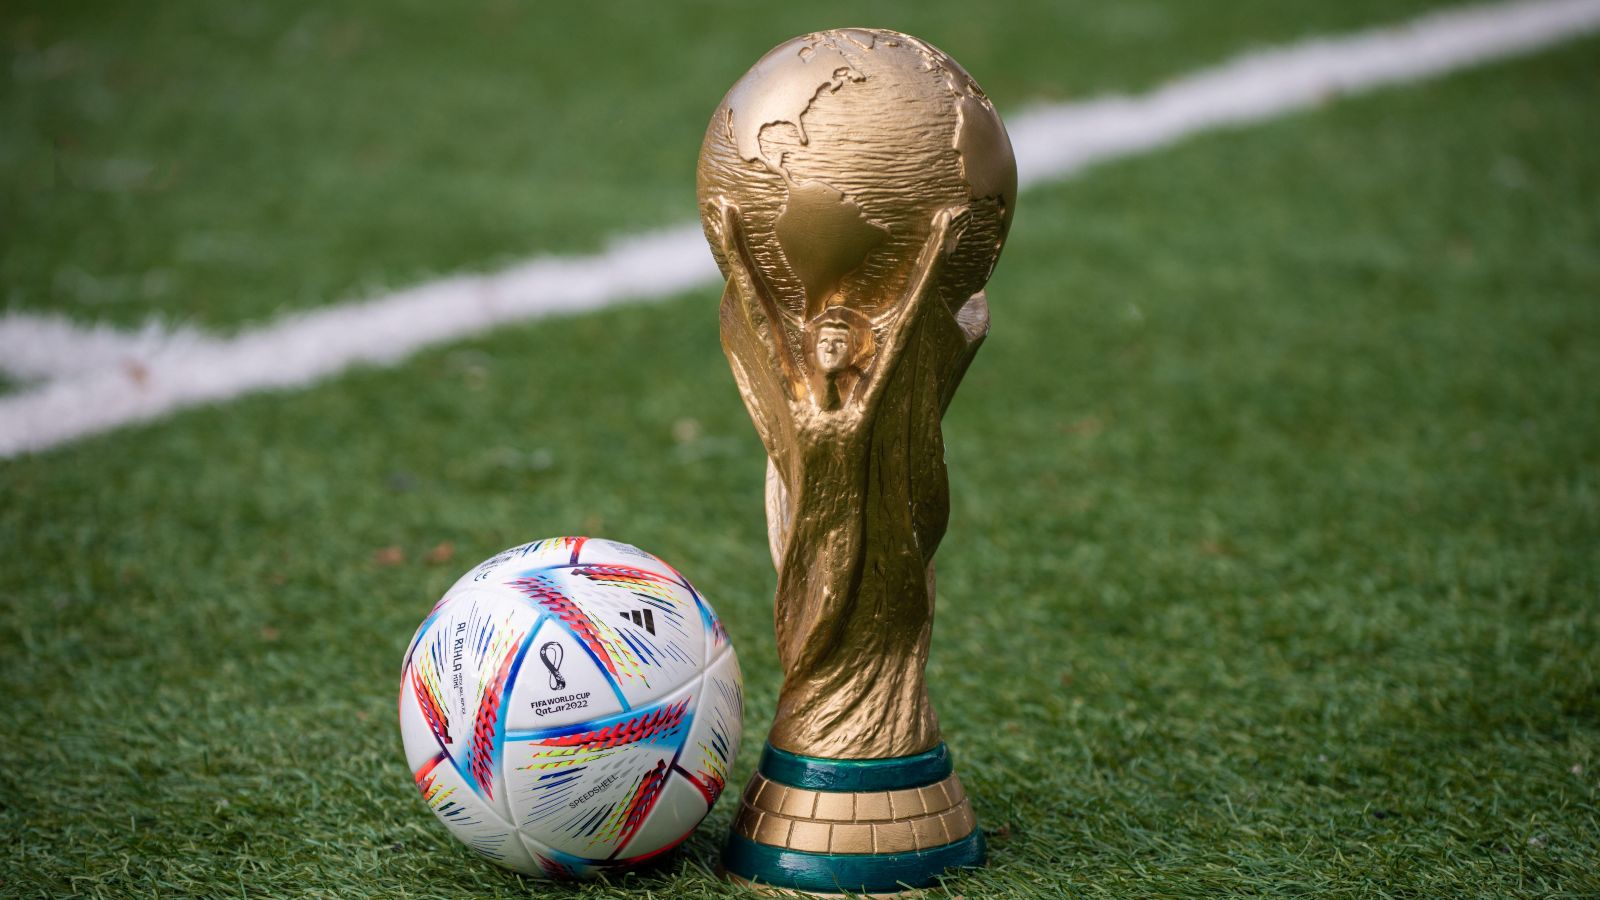 A closer look at the big game: FIFA World Cup Qatar 2022 - Knowledge Out